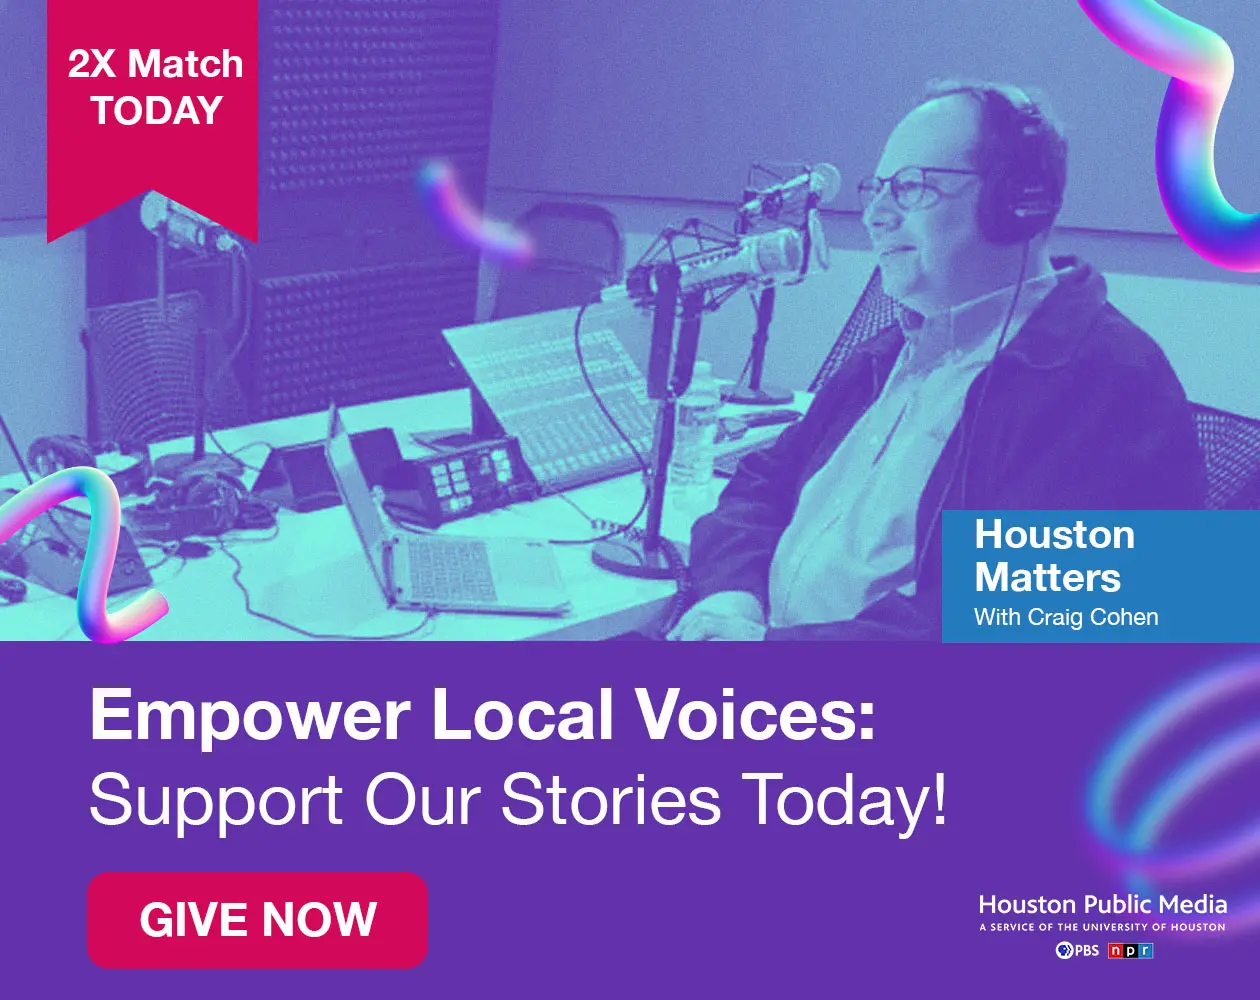 Support Stories that inspire, today! 2X match today only! Give now!